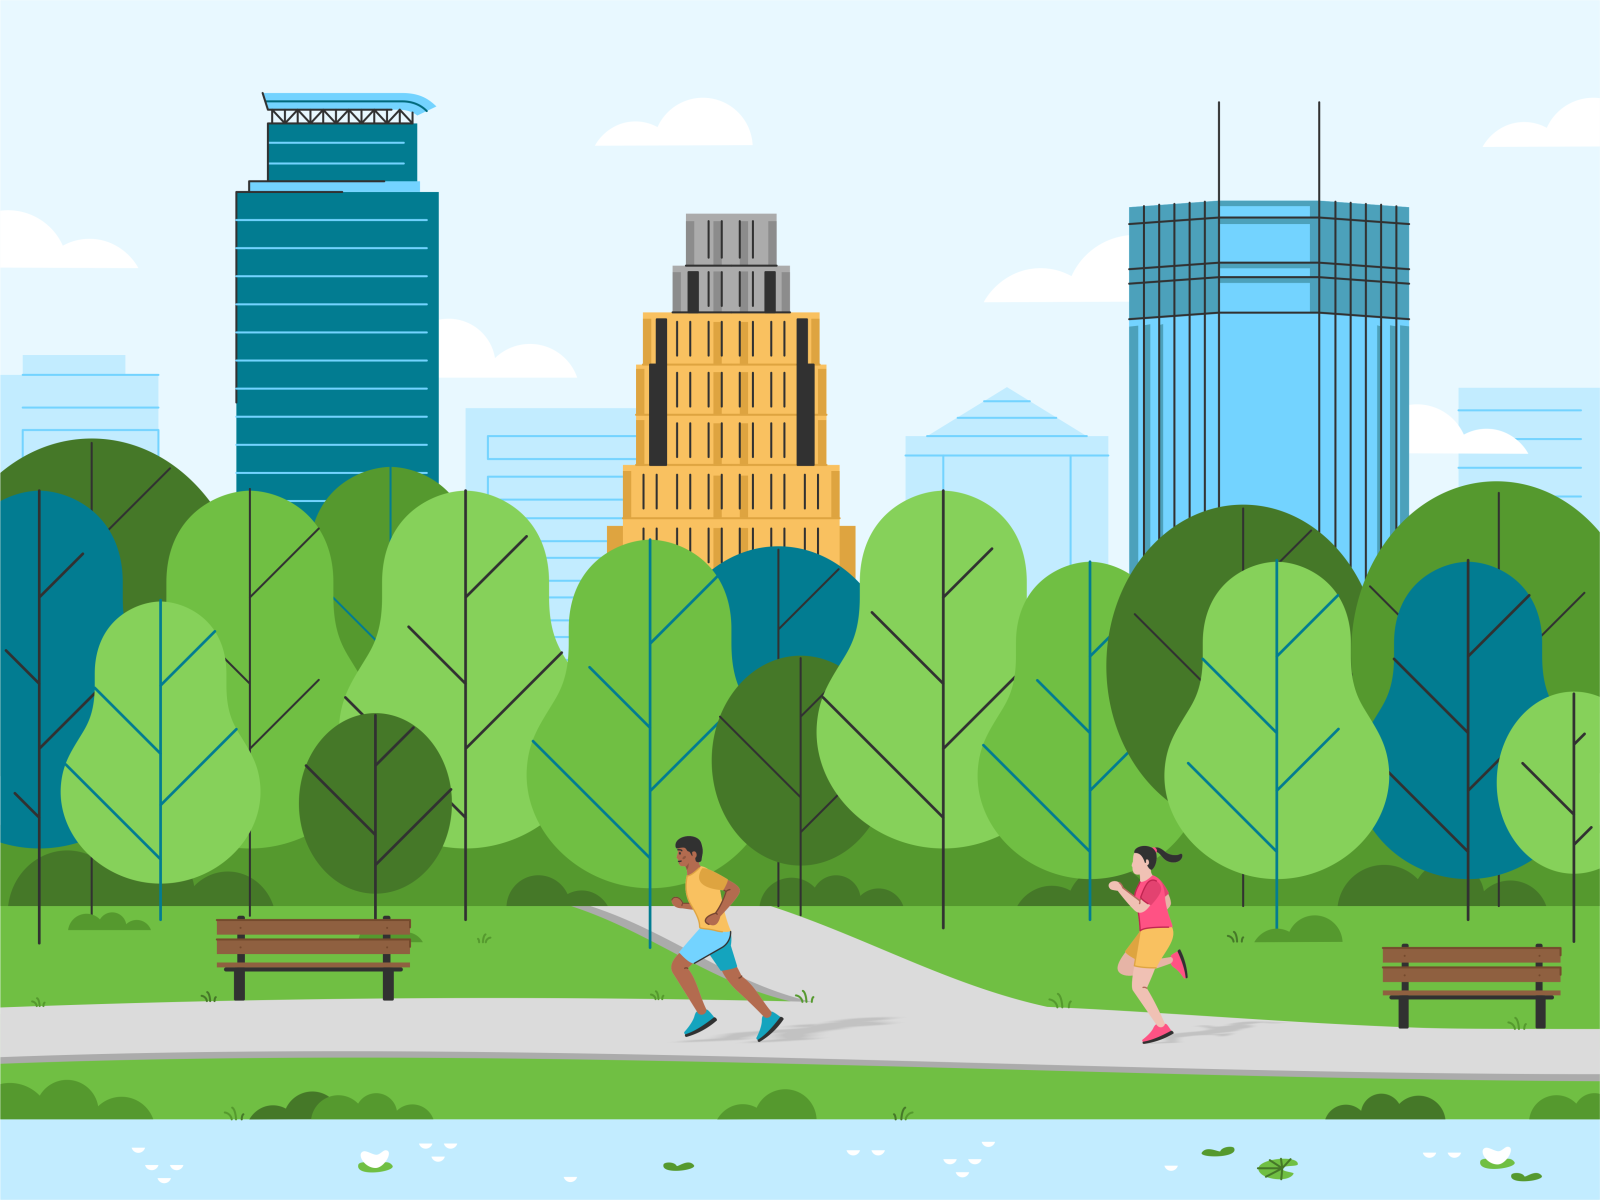 Minneapolis 🏙️ ids tower wells fargo center minneapolis capella tower line art town color vector america usa running characters skyline lake michigan landscape buildings tree park illustration city